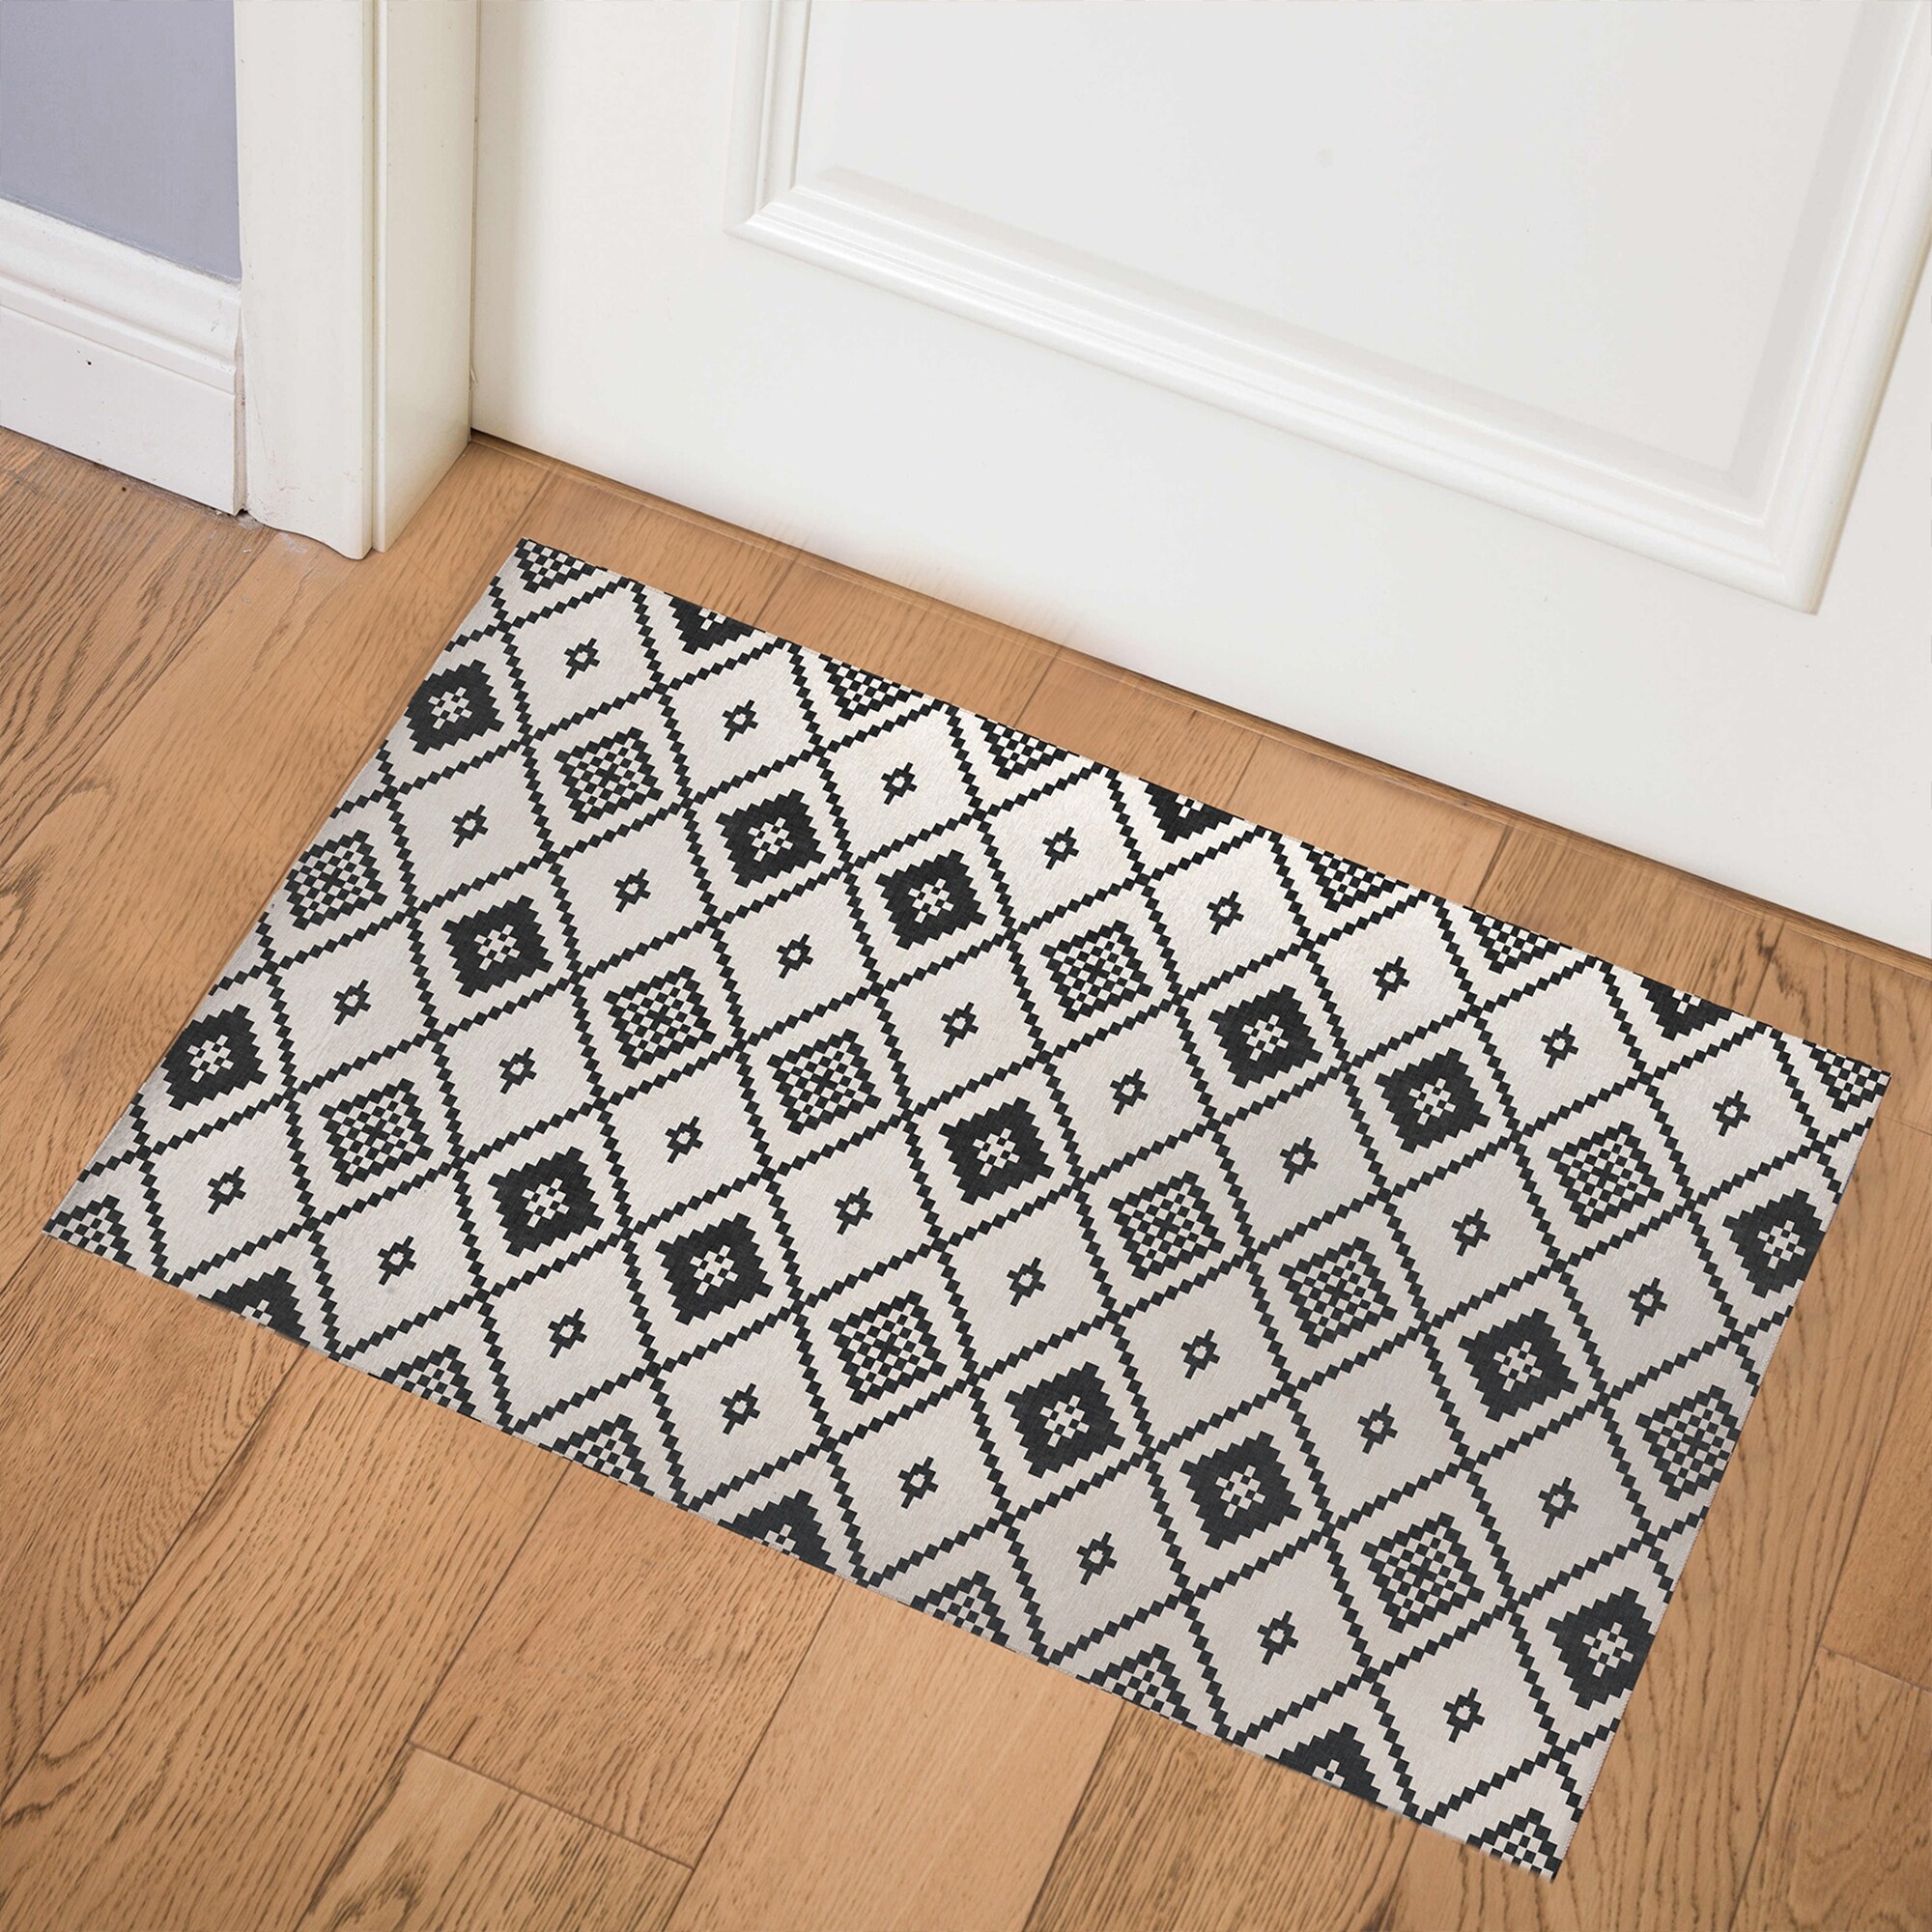 https://ak1.ostkcdn.com/images/products/is/images/direct/c73b661928840d374b0be57cea30b4cc0fa6a62a/SALAH-IN-BLACK-AND-TAN-Indoor-Floor-Mat-By-Becky-Bailey.jpg